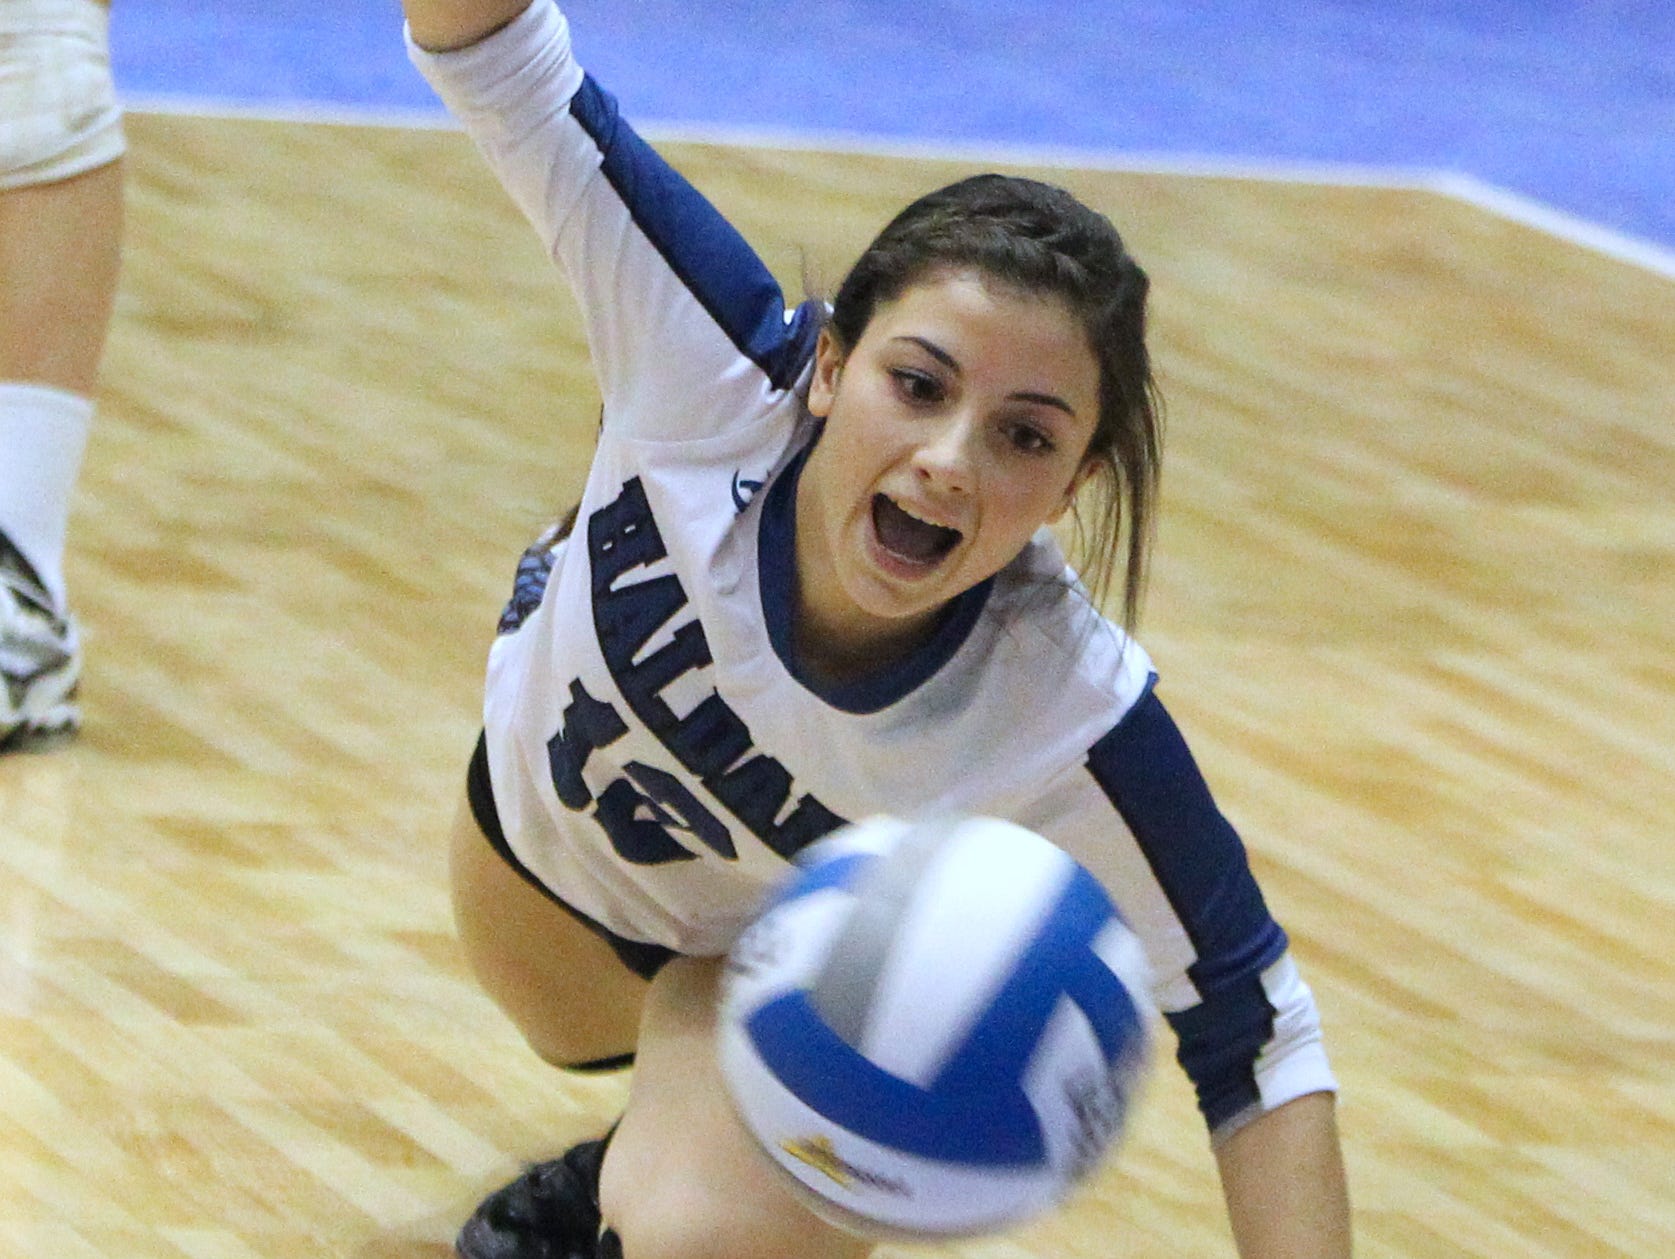 Haldane's Melissa Tringali digs the ball during the NYSPHSAA volleyball Class D championship with Portville at the Glens Falls Civic Center Nov. 16, 2014.